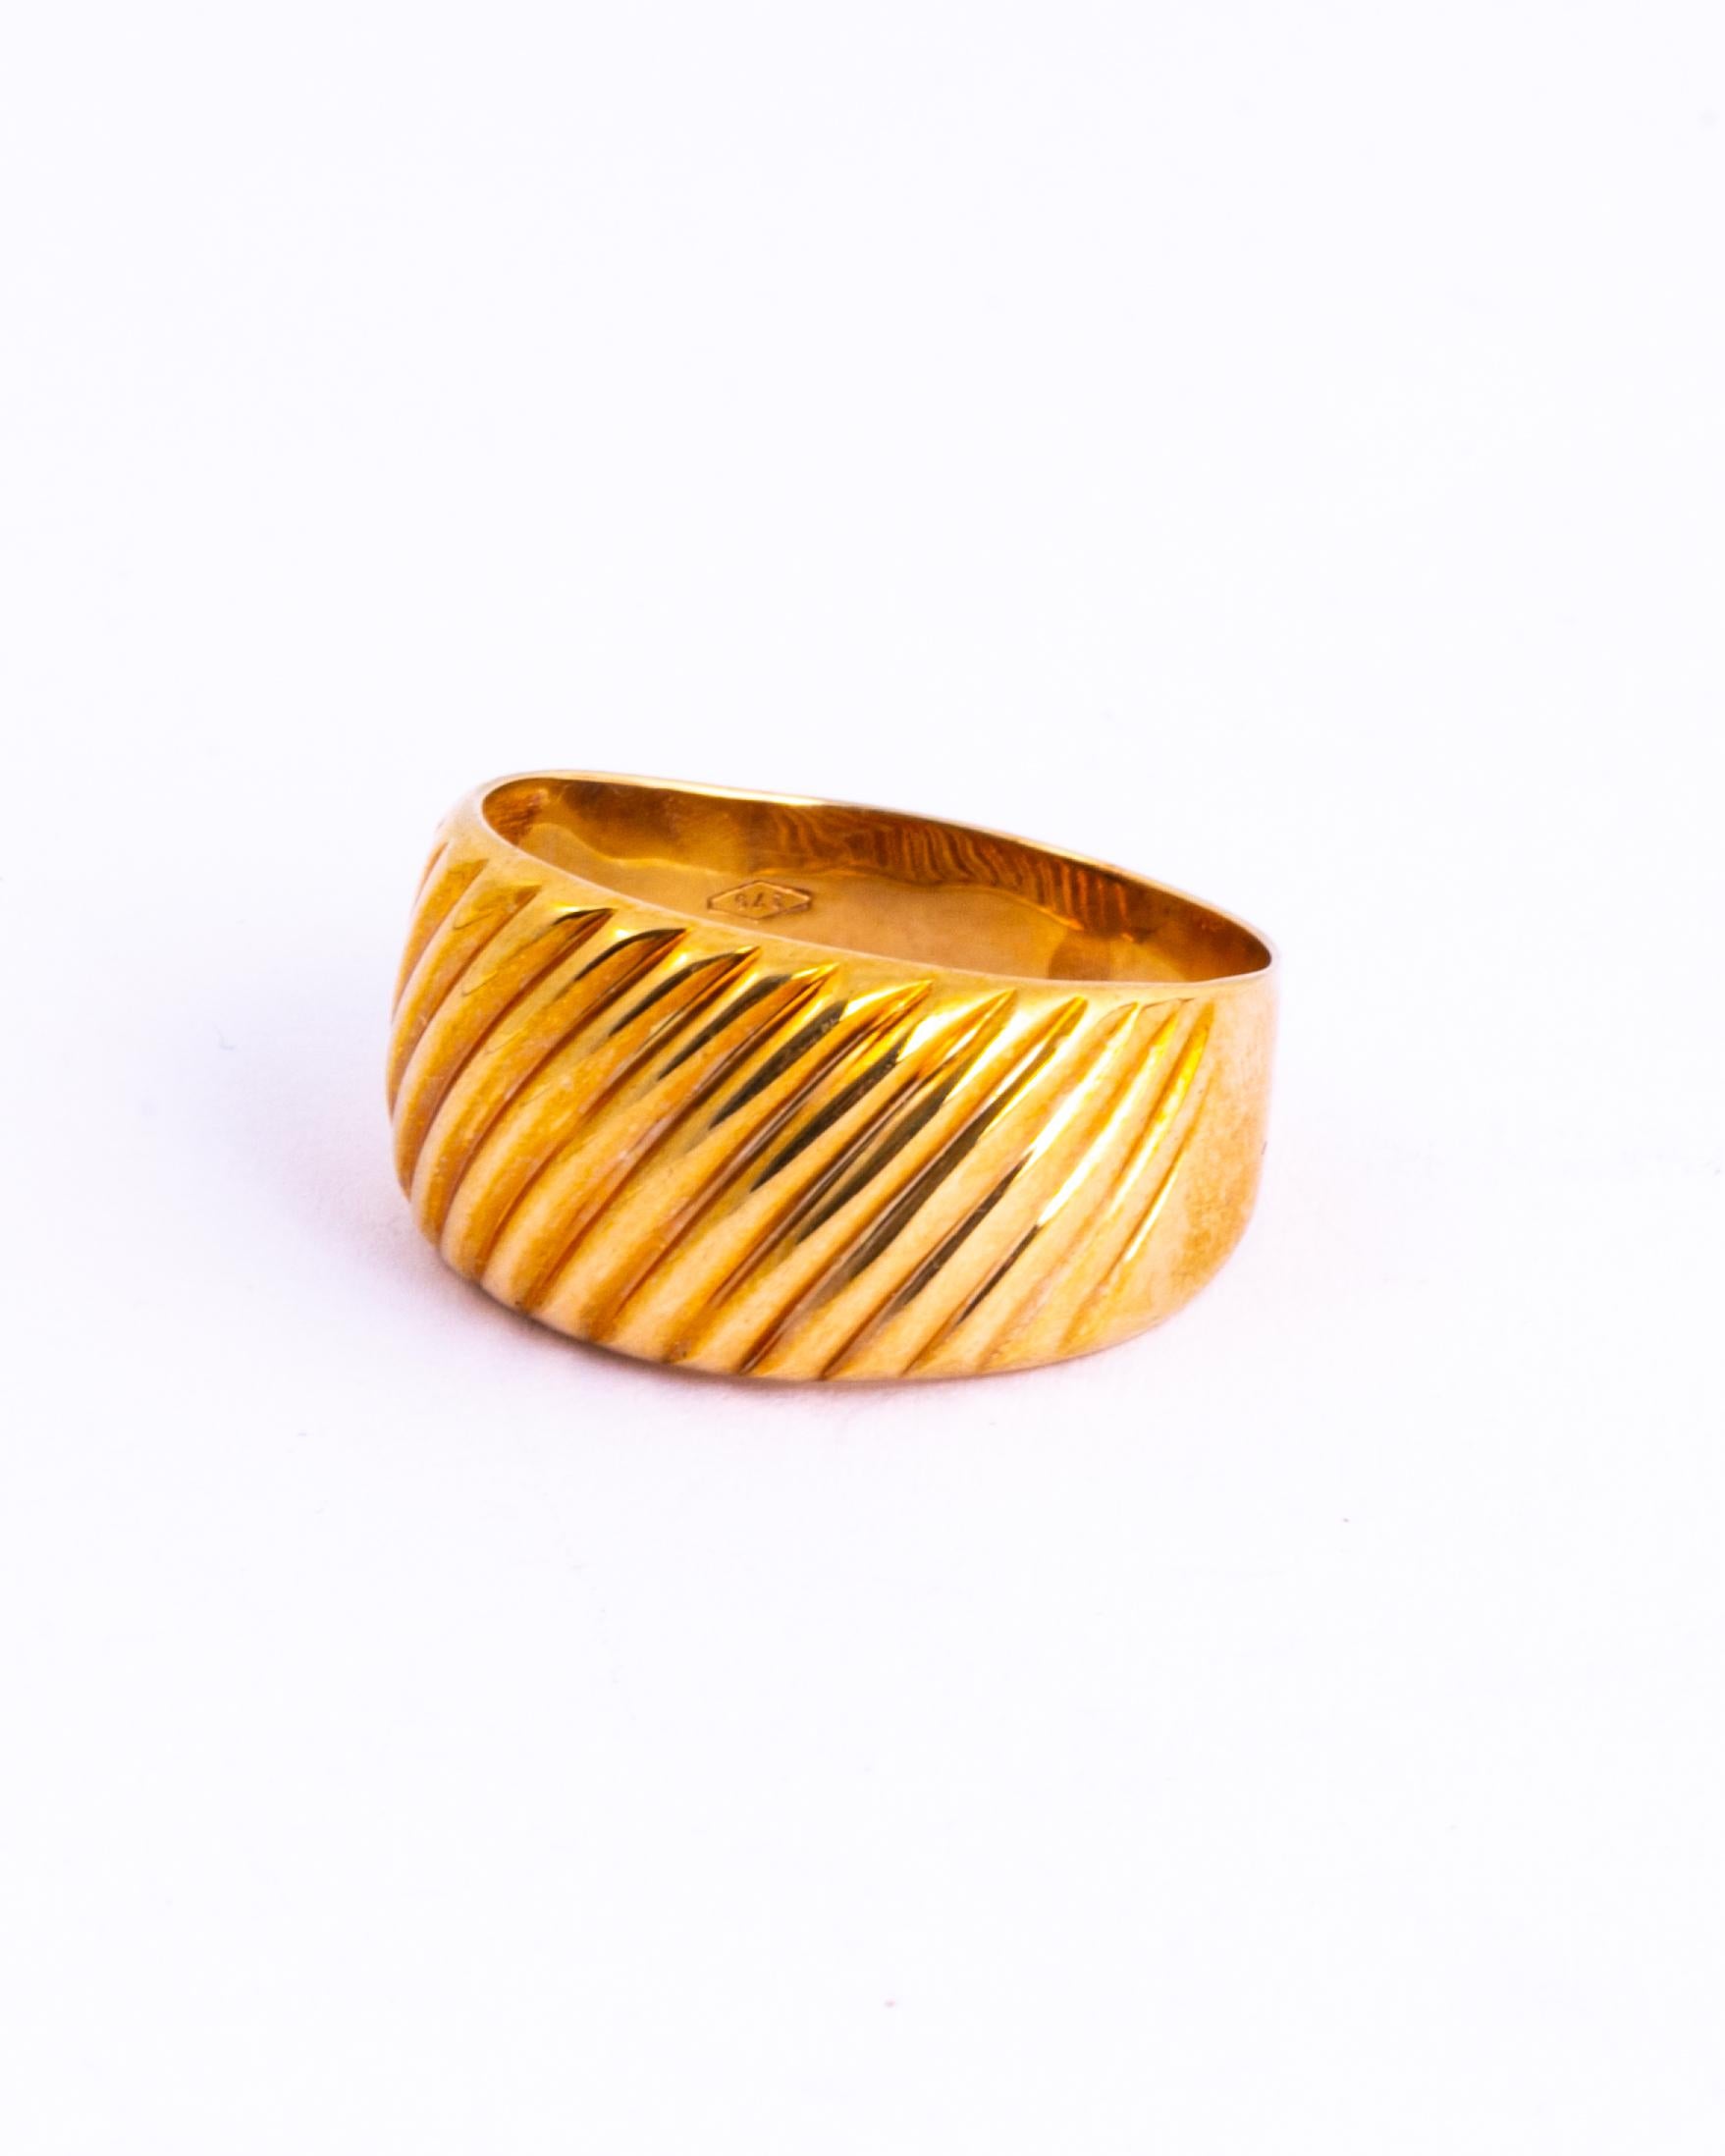 The design is like rippled gold. This would make a great fancy wedding band or an ornate everyday ring. Made in Chester, England.

Size: P 1/2 or 7 1/2 
Band Width: 10mm

Weight: 3.3g